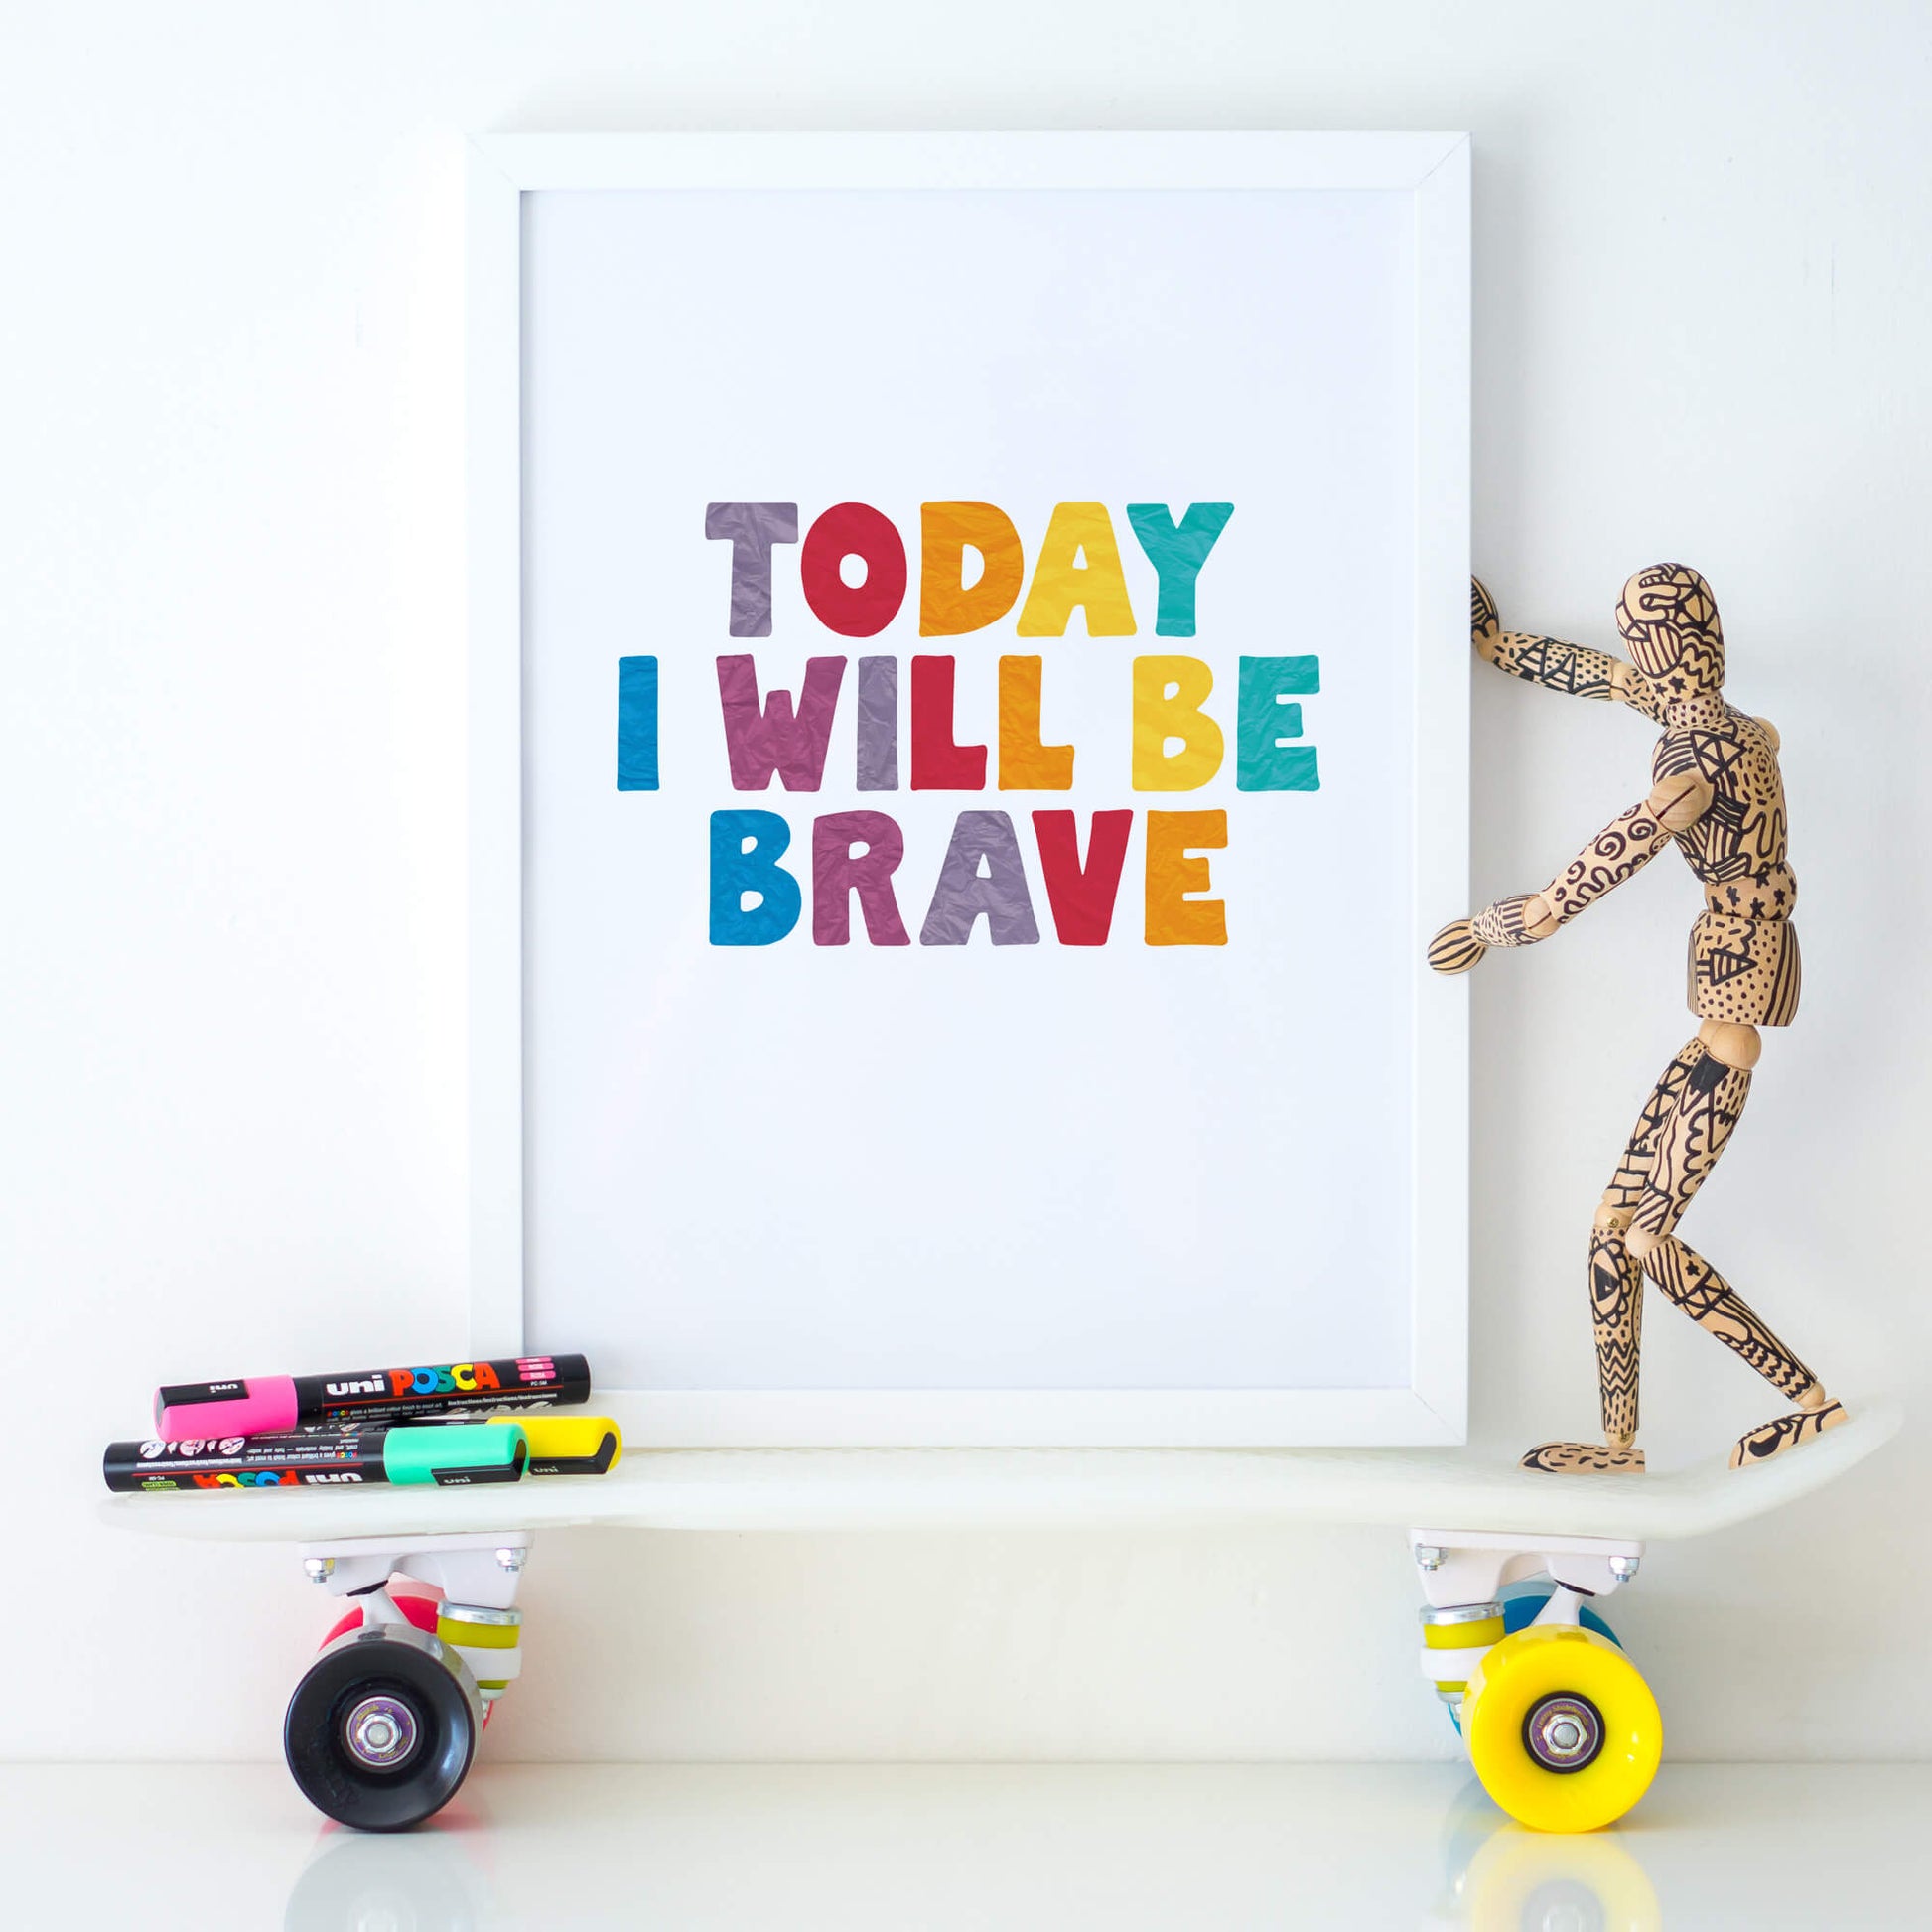 Today I Will Be Brave Print by SixElevenCreations. Product Code SEP0507